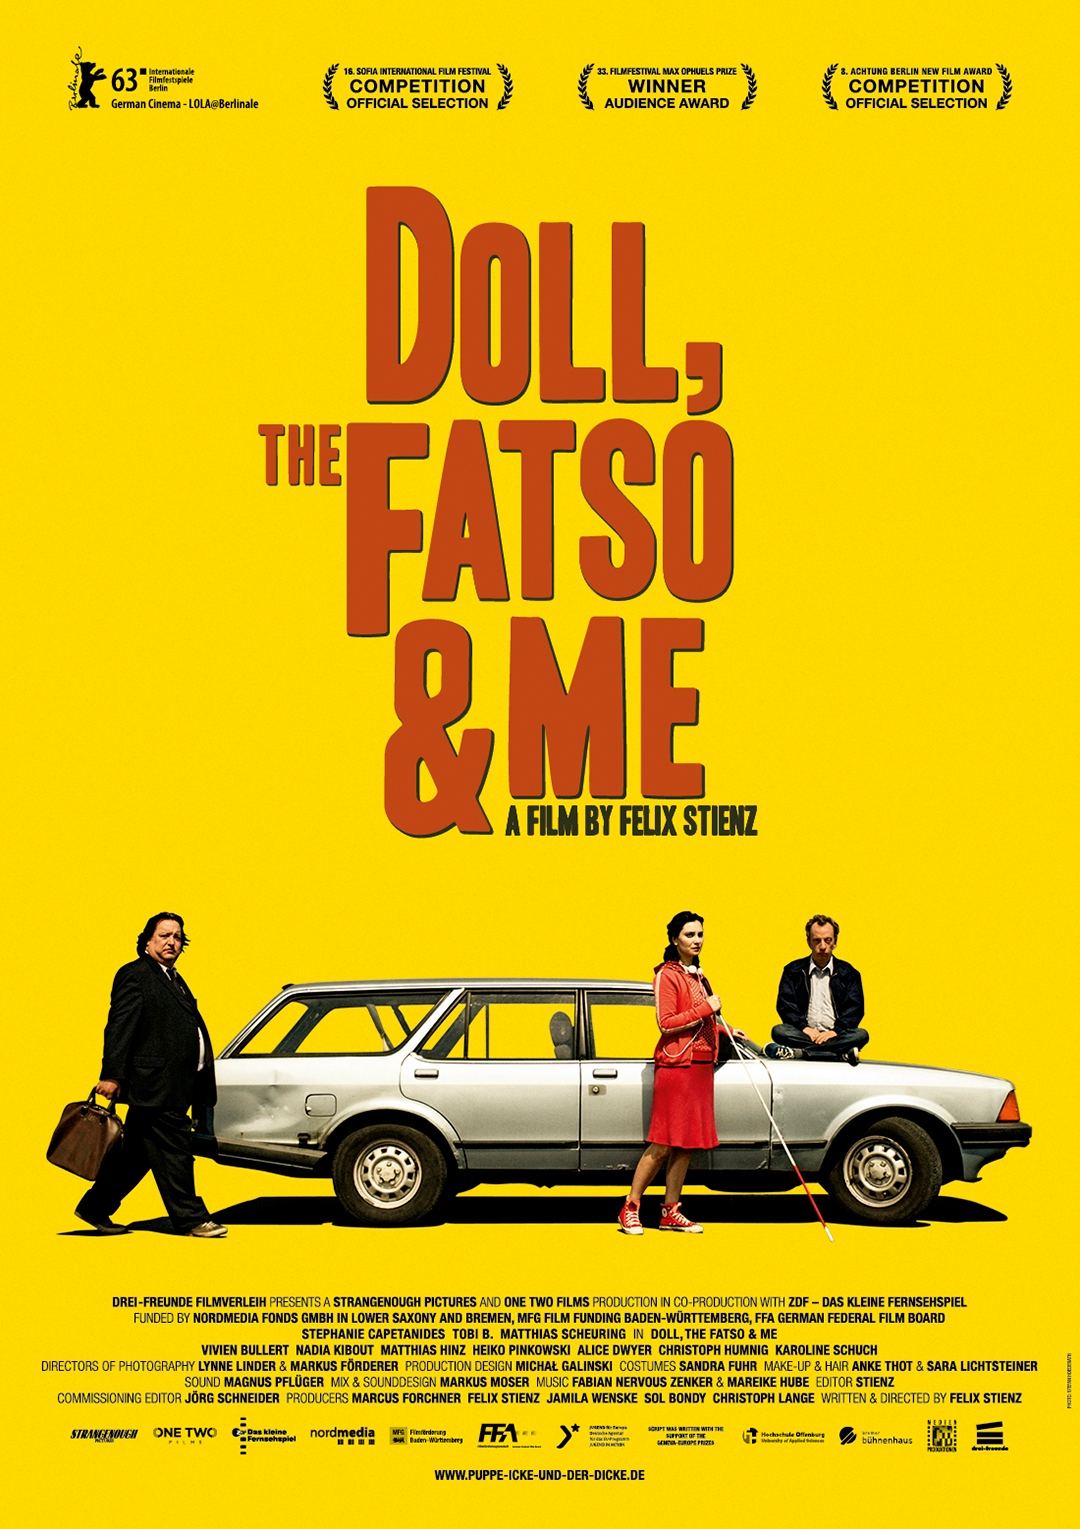 DOLL, THE FATSO & ME / PUPPE, ICKE & DER DICKE Movie Poster